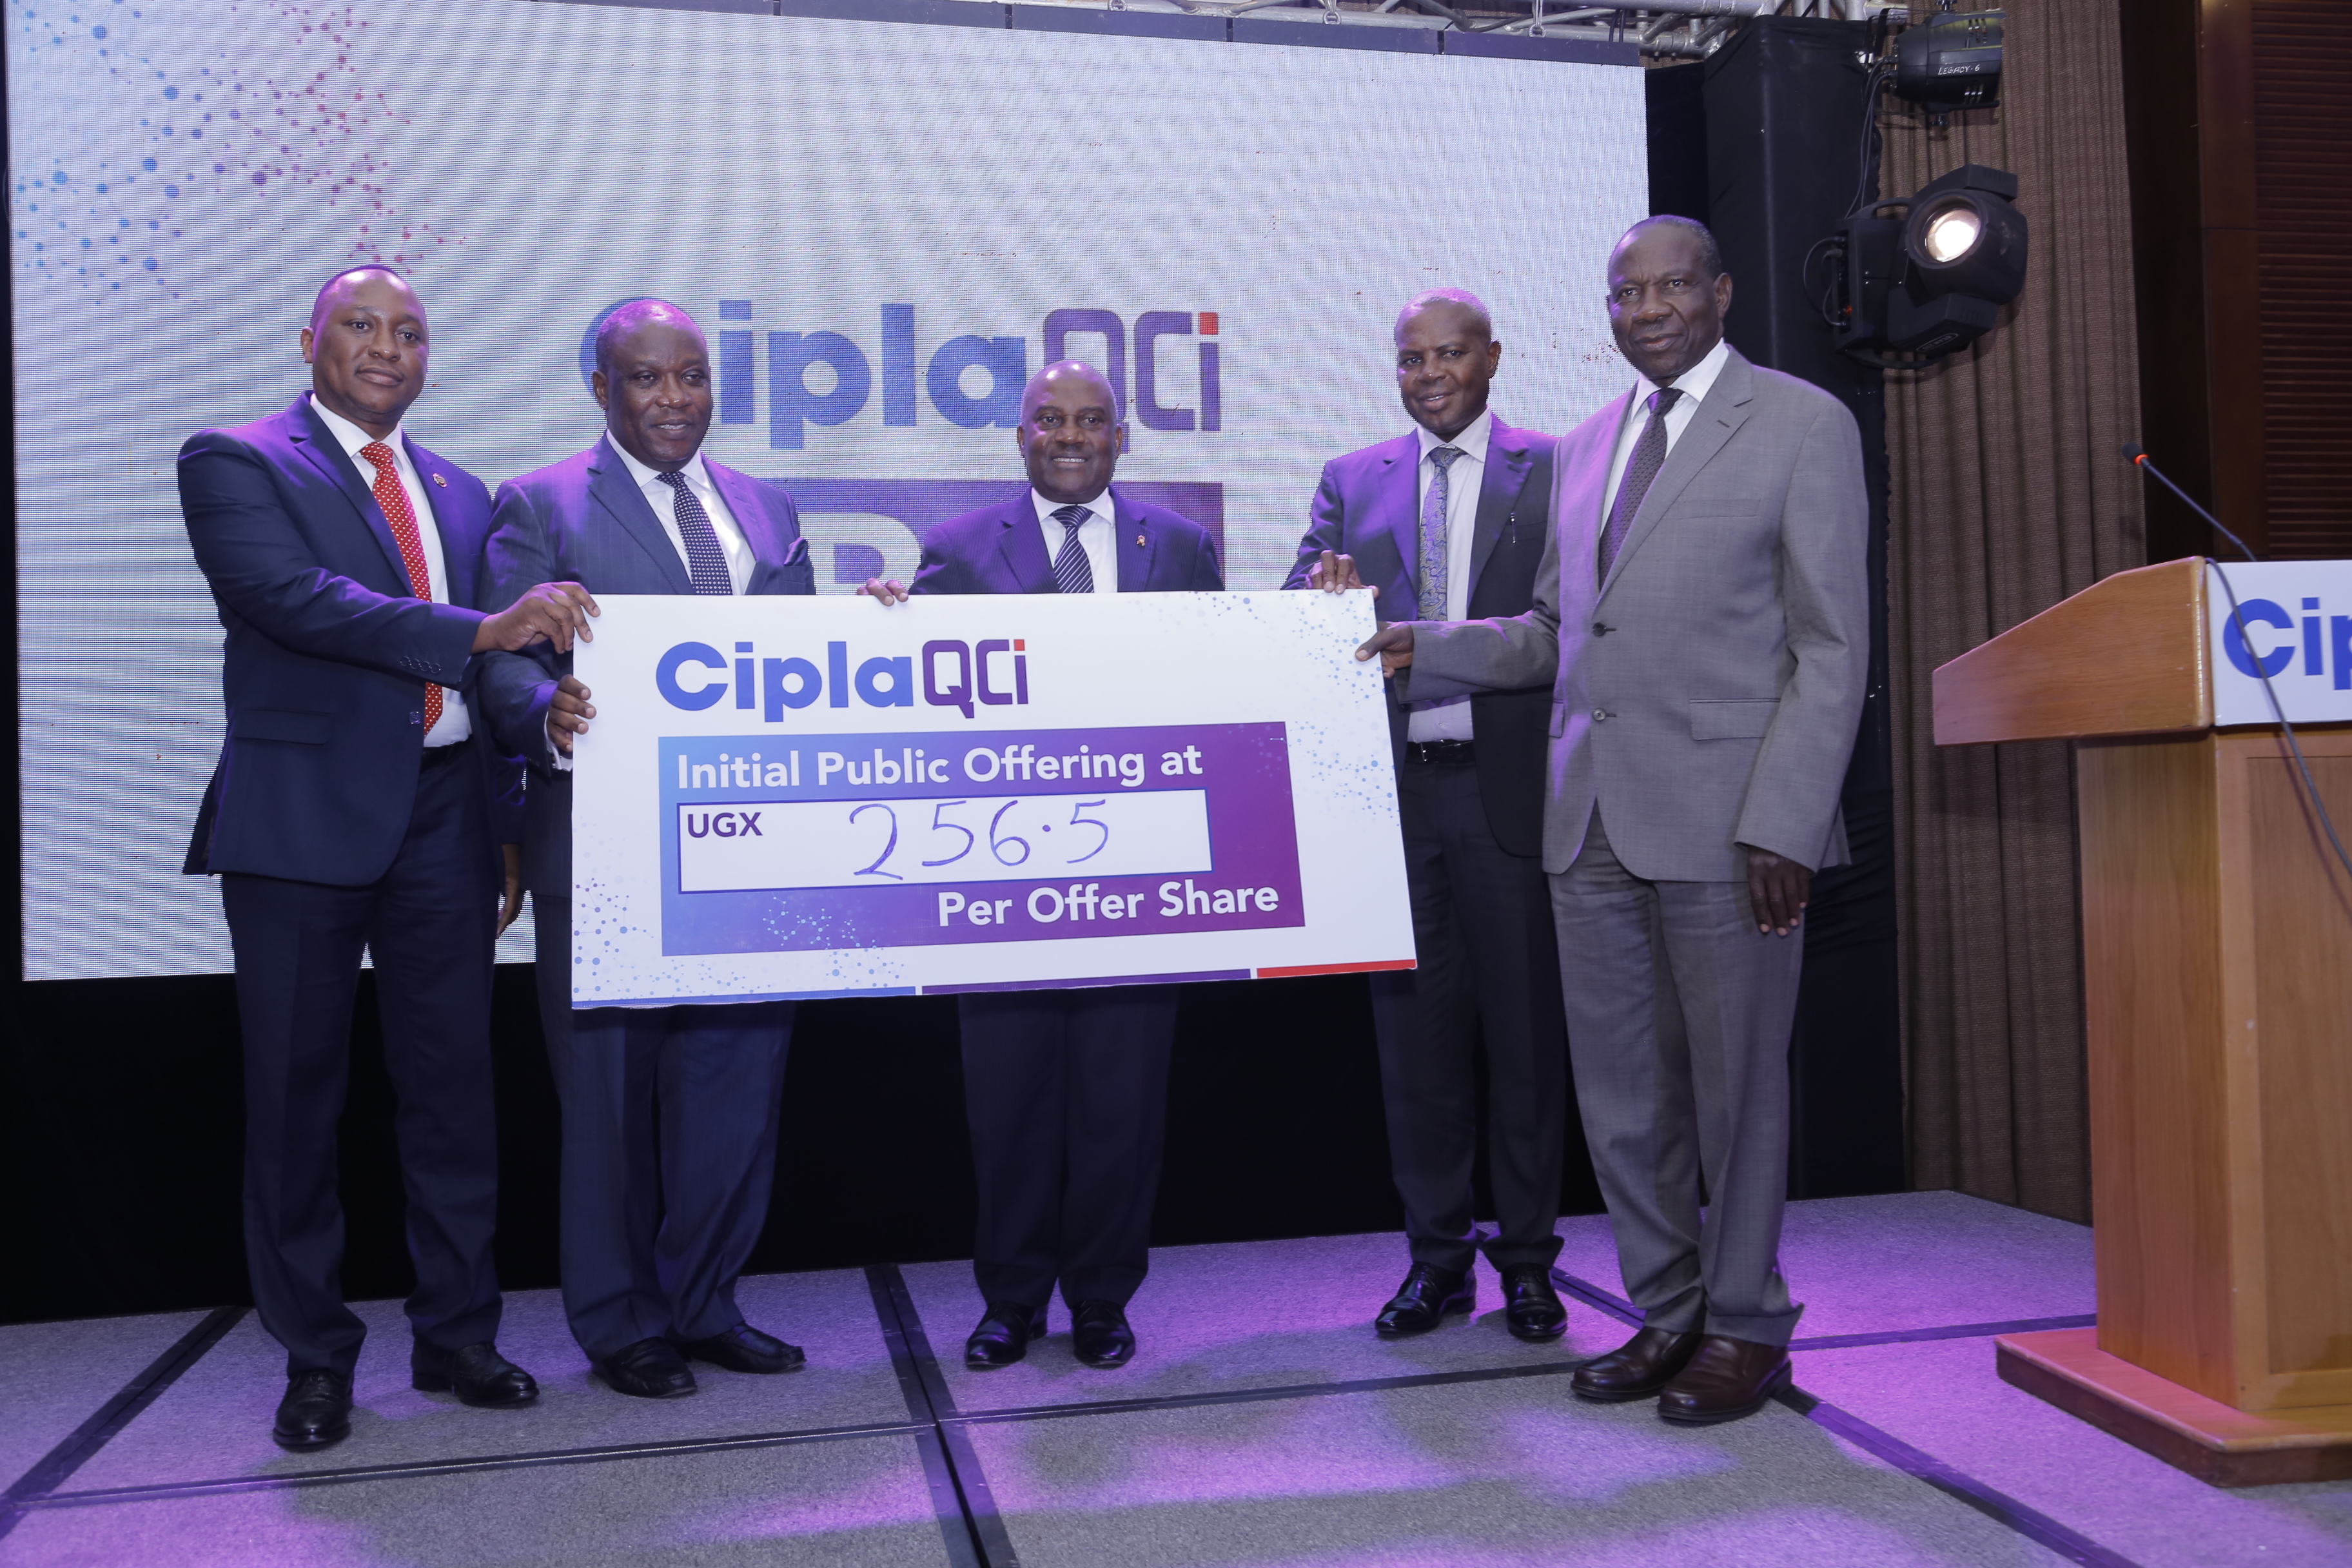 Hon. Matia Kasaija, Minister for Finance (Right) and Mr. Emmanuel Katongole, Executive Chairman Cipla Quality Chemical Industries Limited (middle) flanked by other officials unveil the CiplaQCIL Initial Public Offer Share price